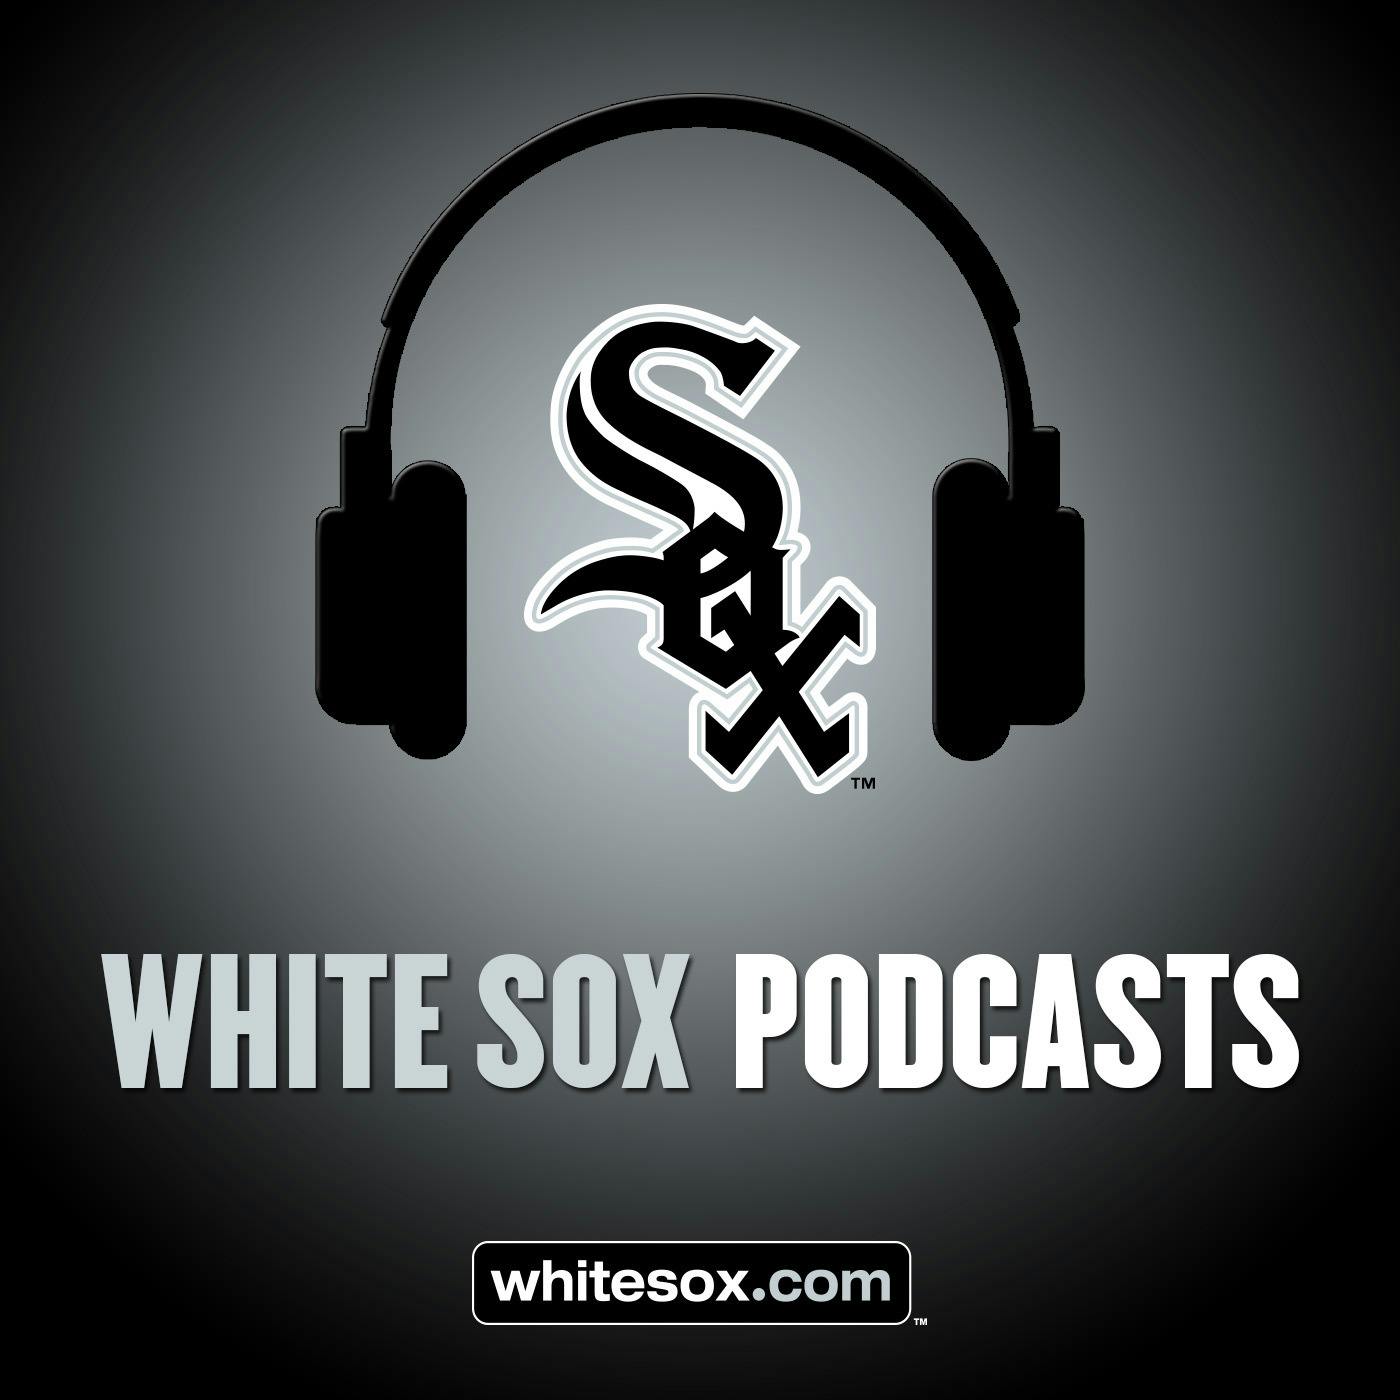 5/4/19: White Sox Weekly